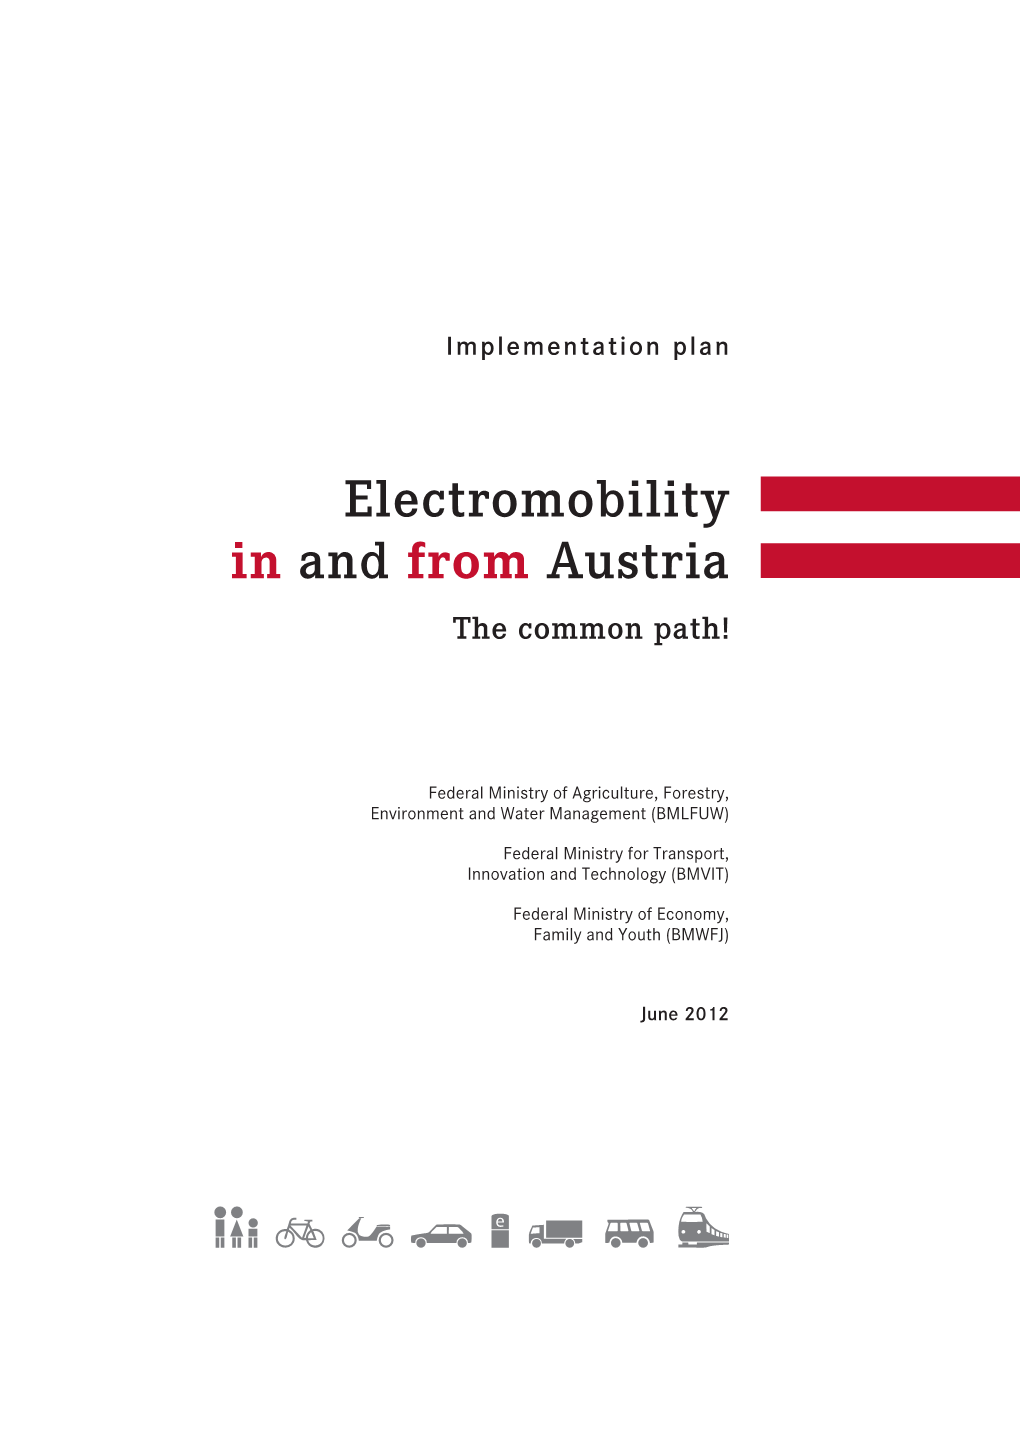 Implementation Plan: Electromobility in and from Austria